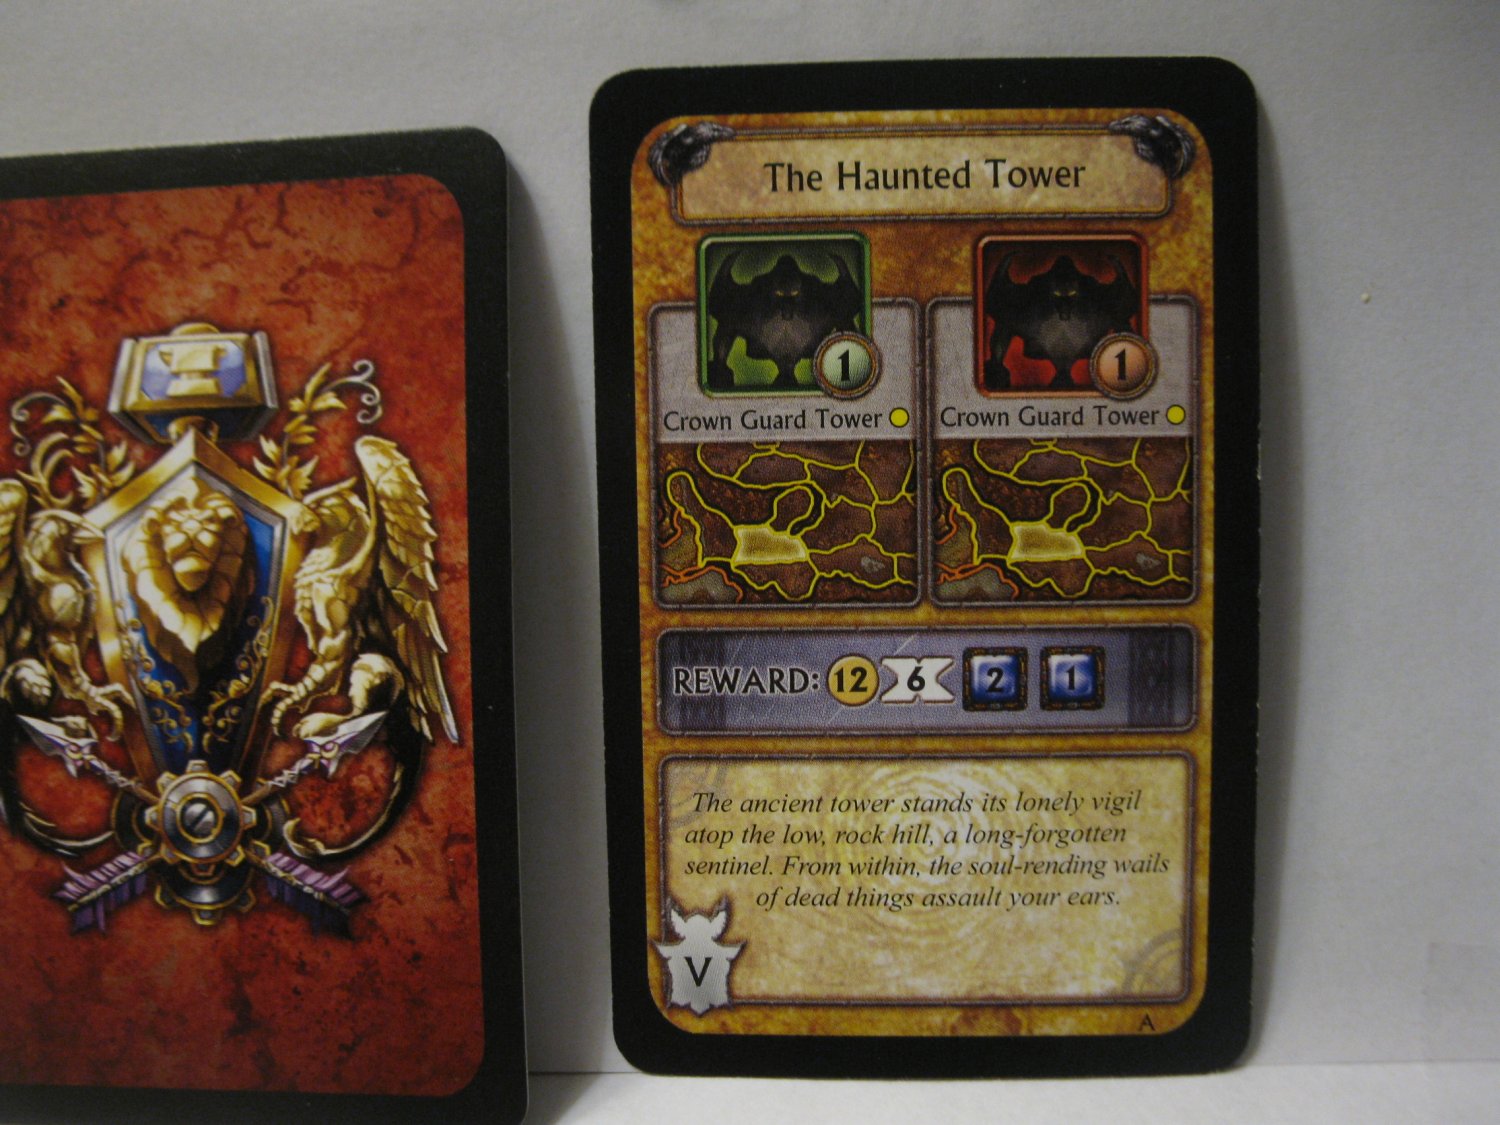 2005 World of Warcraft Board Game piece: Quest Card - The Haunted Tower